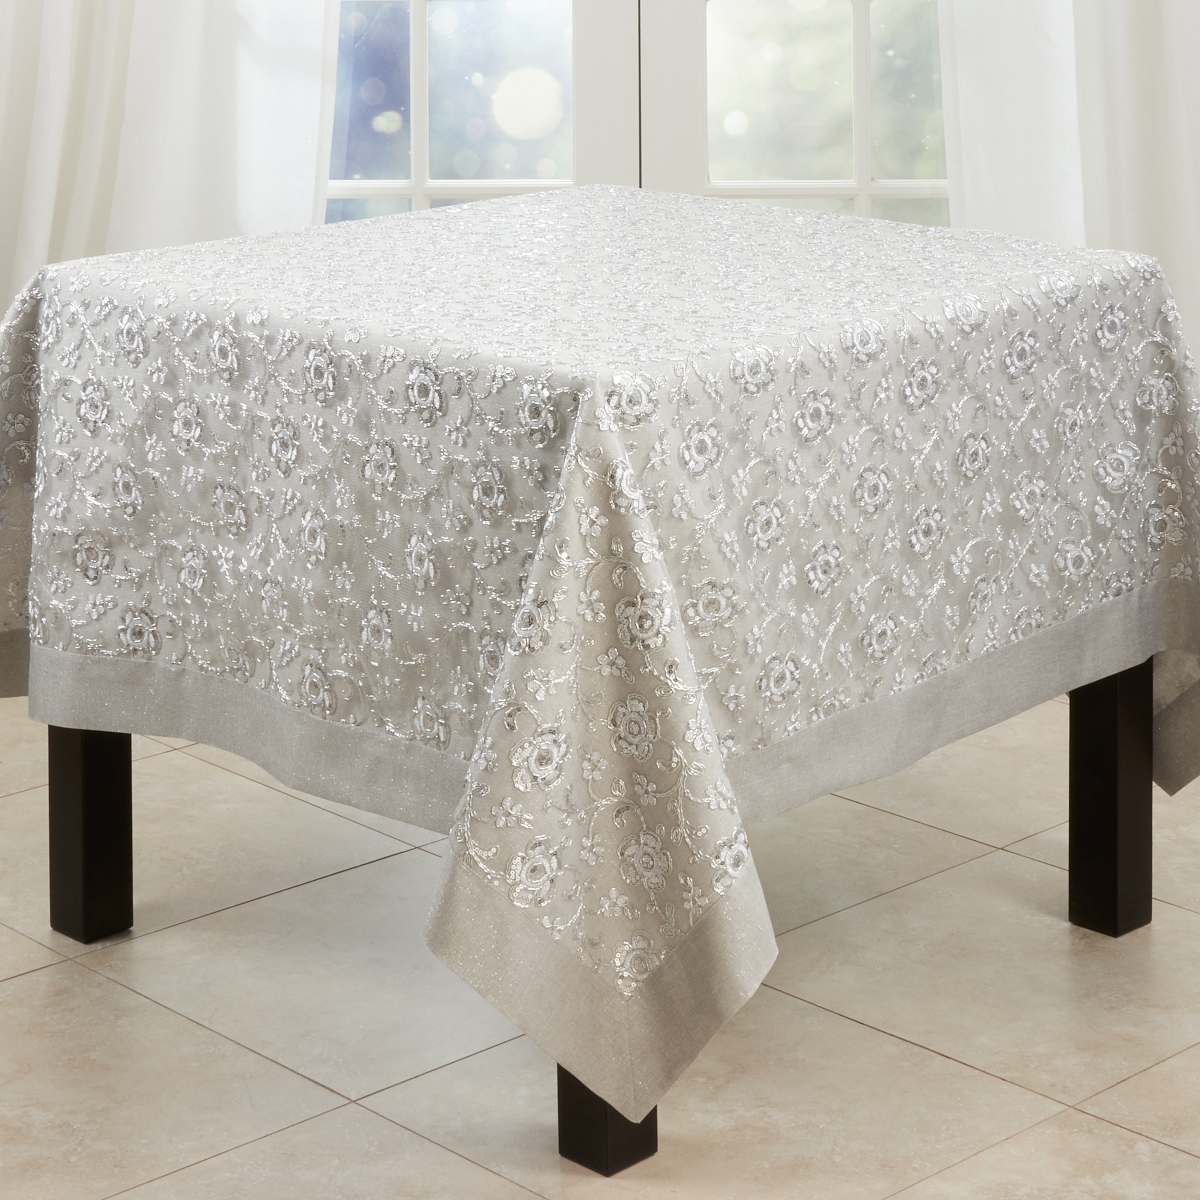 Picture of Saro Lifestyle 4019.S65S 65 in. Floral Embroidered Tablecloth, Silver Stripe